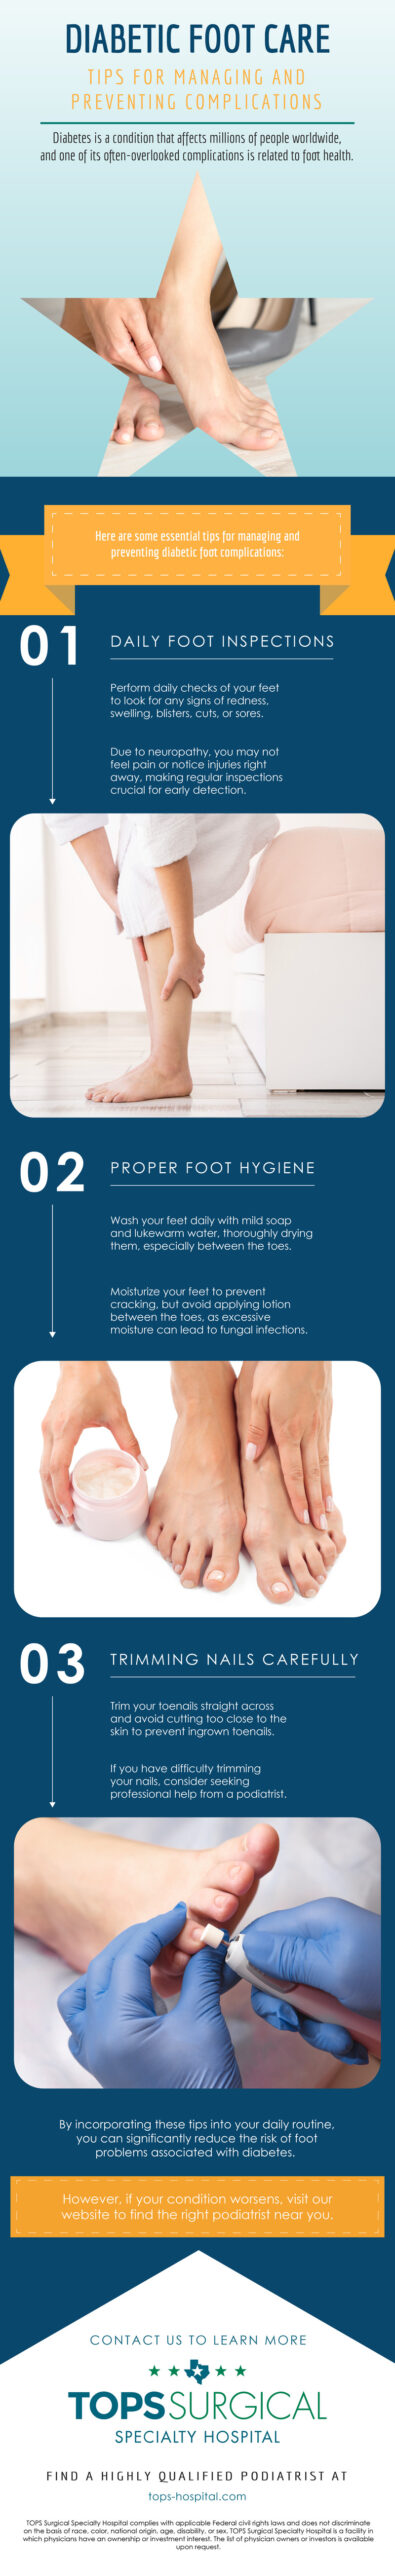 Diabetic Foot Care Tips For Managing And Preventing Complications